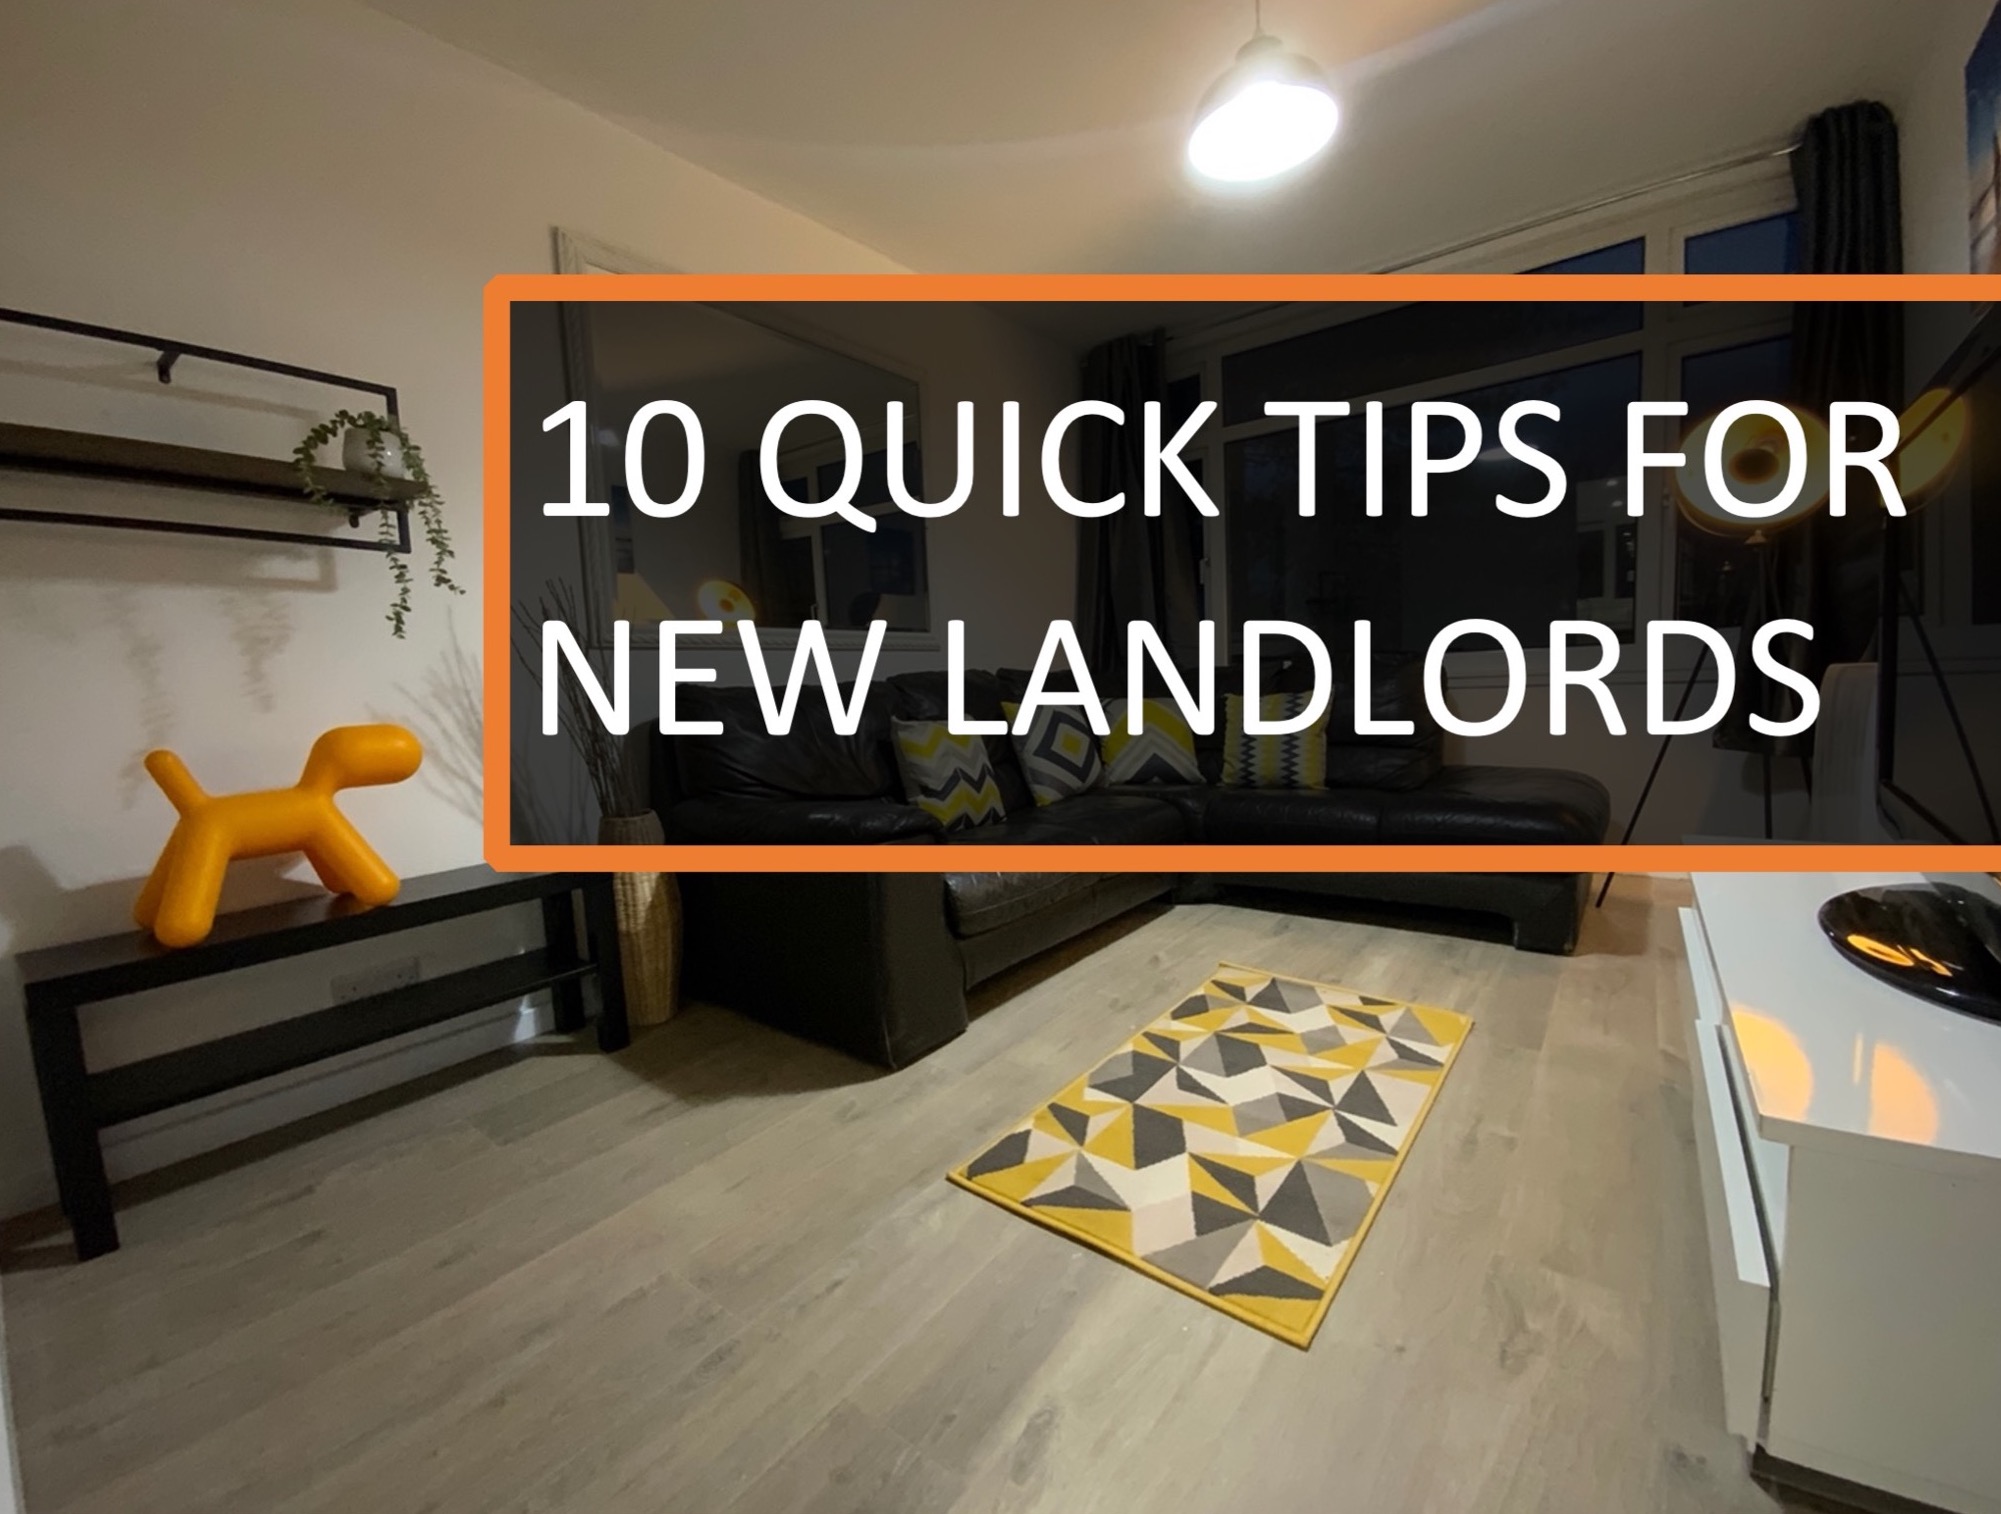 10 quick tips for new landlords!